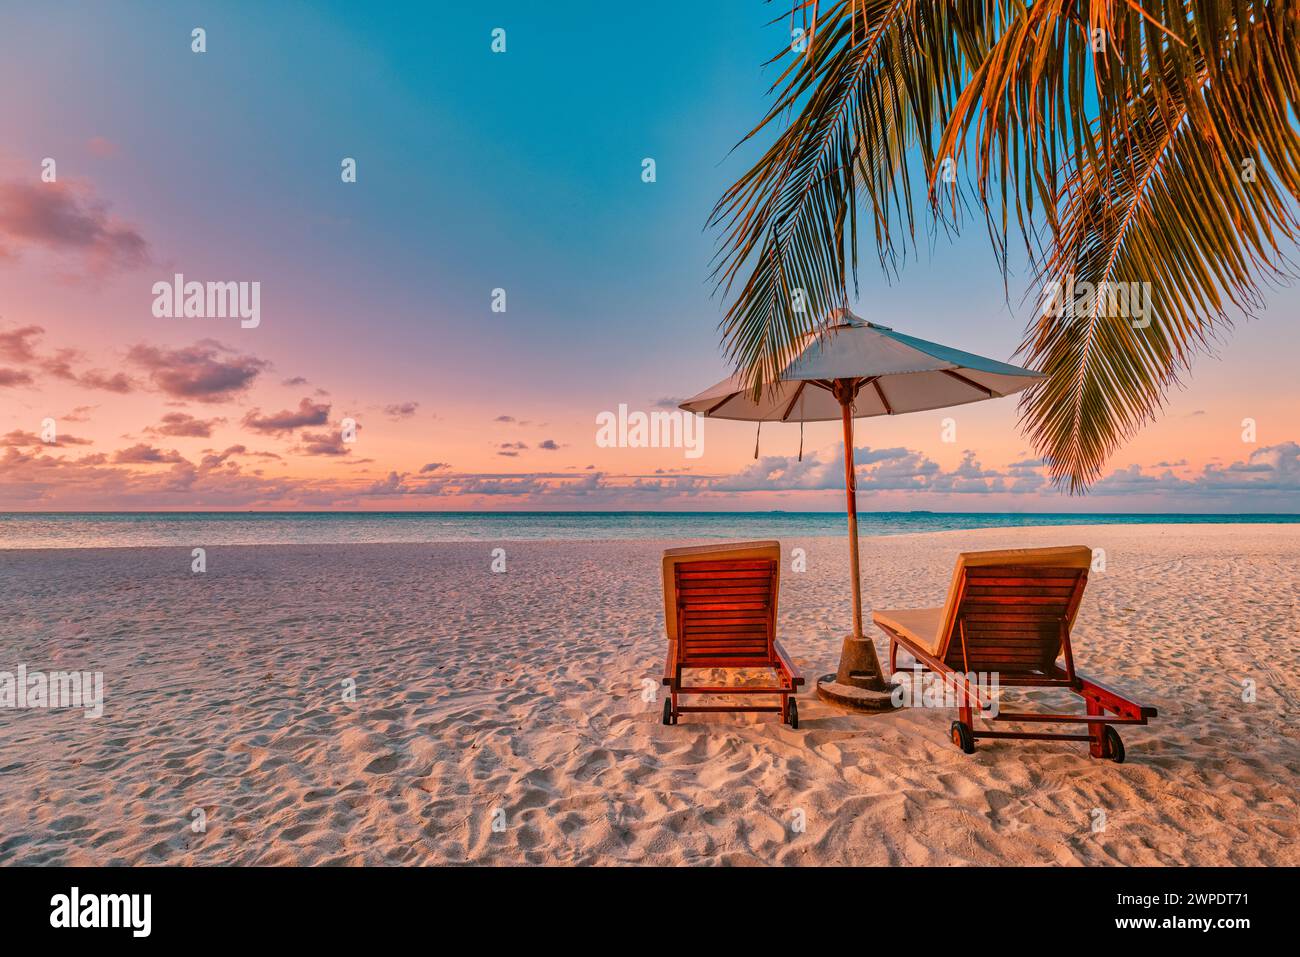 Amazing sunset beach. Romantic couple chairs umbrella. Tranquil togetherness love concept scenery, relax beach, beautiful landscape design. Getaway Stock Photo